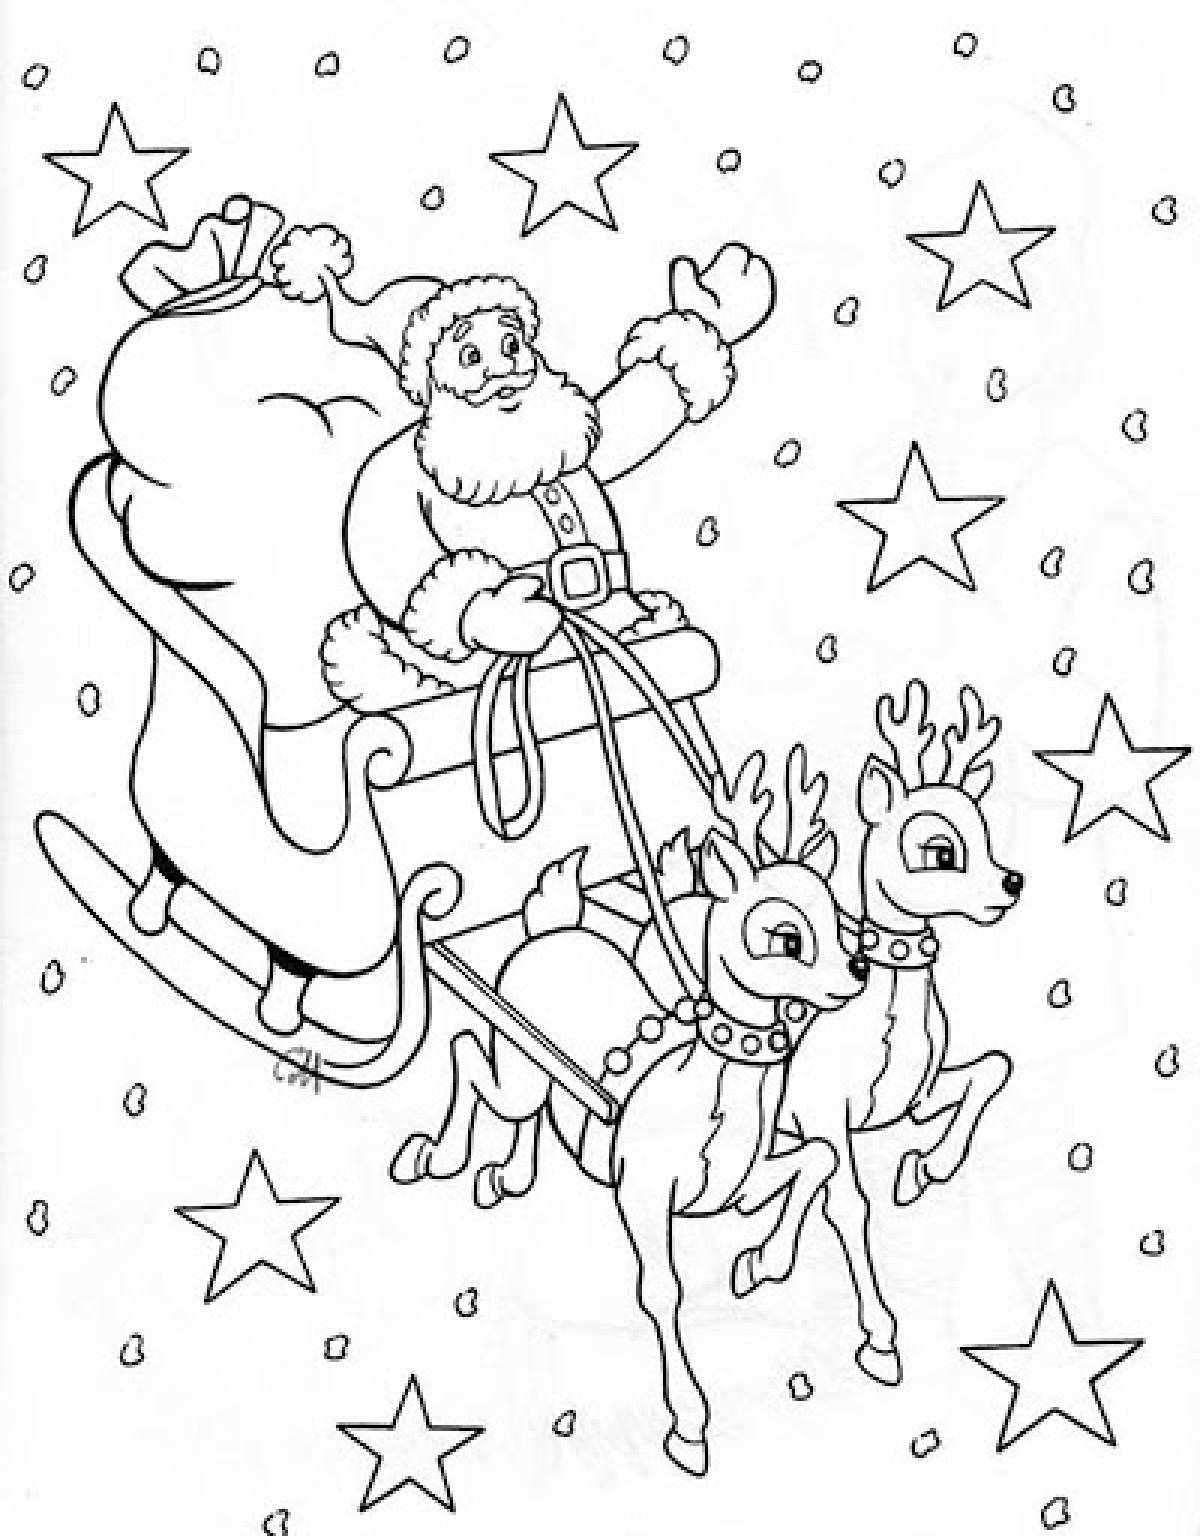 New Year's Eve coloring page